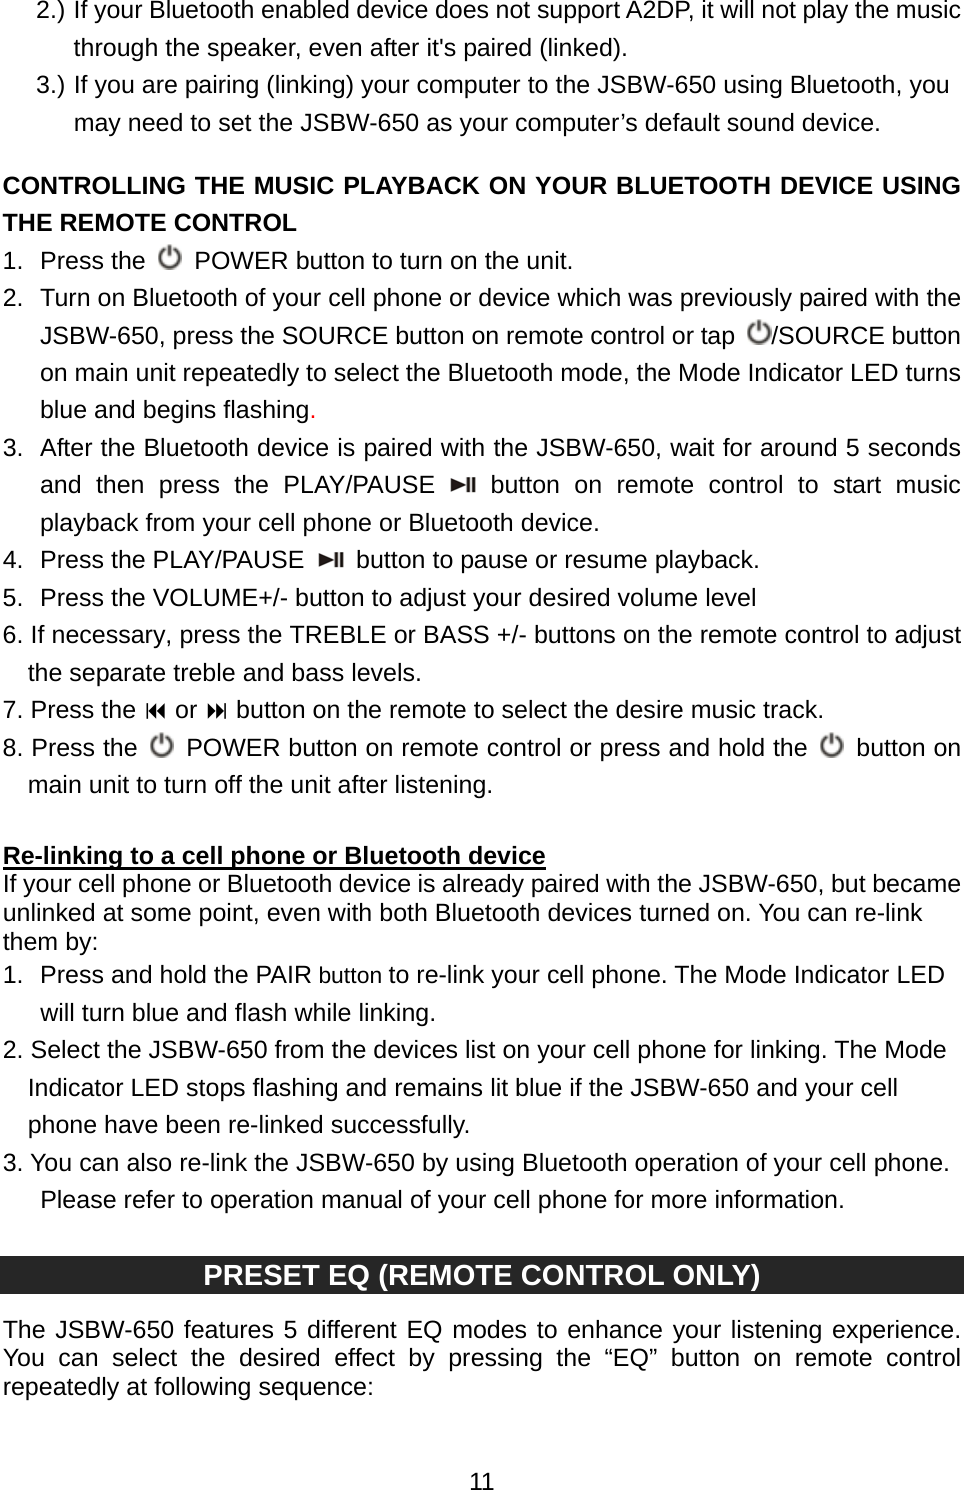  112.) If your Bluetooth enabled device does not support A2DP, it will not play the music through the speaker, even after it&apos;s paired (linked). 3.) If you are pairing (linking) your computer to the JSBW-650 using Bluetooth, you may need to set the JSBW-650 as your computer’s default sound device.  CONTROLLING THE MUSIC PLAYBACK ON YOUR BLUETOOTH DEVICE USING THE REMOTE CONTROL 1. Press the    POWER button to turn on the unit. 2.  Turn on Bluetooth of your cell phone or device which was previously paired with the JSBW-650, press the SOURCE button on remote control or tap  /SOURCE button on main unit repeatedly to select the Bluetooth mode, the Mode Indicator LED turns blue and begins flashing.  3.  After the Bluetooth device is paired with the JSBW-650, wait for around 5 seconds and then press the PLAY/PAUSE  button on remote control to start music playback from your cell phone or Bluetooth device. 4. Press the PLAY/PAUSE   button to pause or resume playback. 5.  Press the VOLUME+/- button to adjust your desired volume level 6. If necessary, press the TREBLE or BASS +/- buttons on the remote control to adjust the separate treble and bass levels. 7. Press the  or  button on the remote to select the desire music track.   8. Press the    POWER button on remote control or press and hold the   button on main unit to turn off the unit after listening.  Re-linking to a cell phone or Bluetooth device  If your cell phone or Bluetooth device is already paired with the JSBW-650, but became unlinked at some point, even with both Bluetooth devices turned on. You can re-link them by: 1.  Press and hold the PAIR button to re-link your cell phone. The Mode Indicator LED will turn blue and flash while linking. 2. Select the JSBW-650 from the devices list on your cell phone for linking. The Mode Indicator LED stops flashing and remains lit blue if the JSBW-650 and your cell phone have been re-linked successfully. 3. You can also re-link the JSBW-650 by using Bluetooth operation of your cell phone. Please refer to operation manual of your cell phone for more information.  PRESET EQ (REMOTE CONTROL ONLY)  The JSBW-650 features 5 different EQ modes to enhance your listening experience. You can select the desired effect by pressing the “EQ” button on remote control repeatedly at following sequence:  